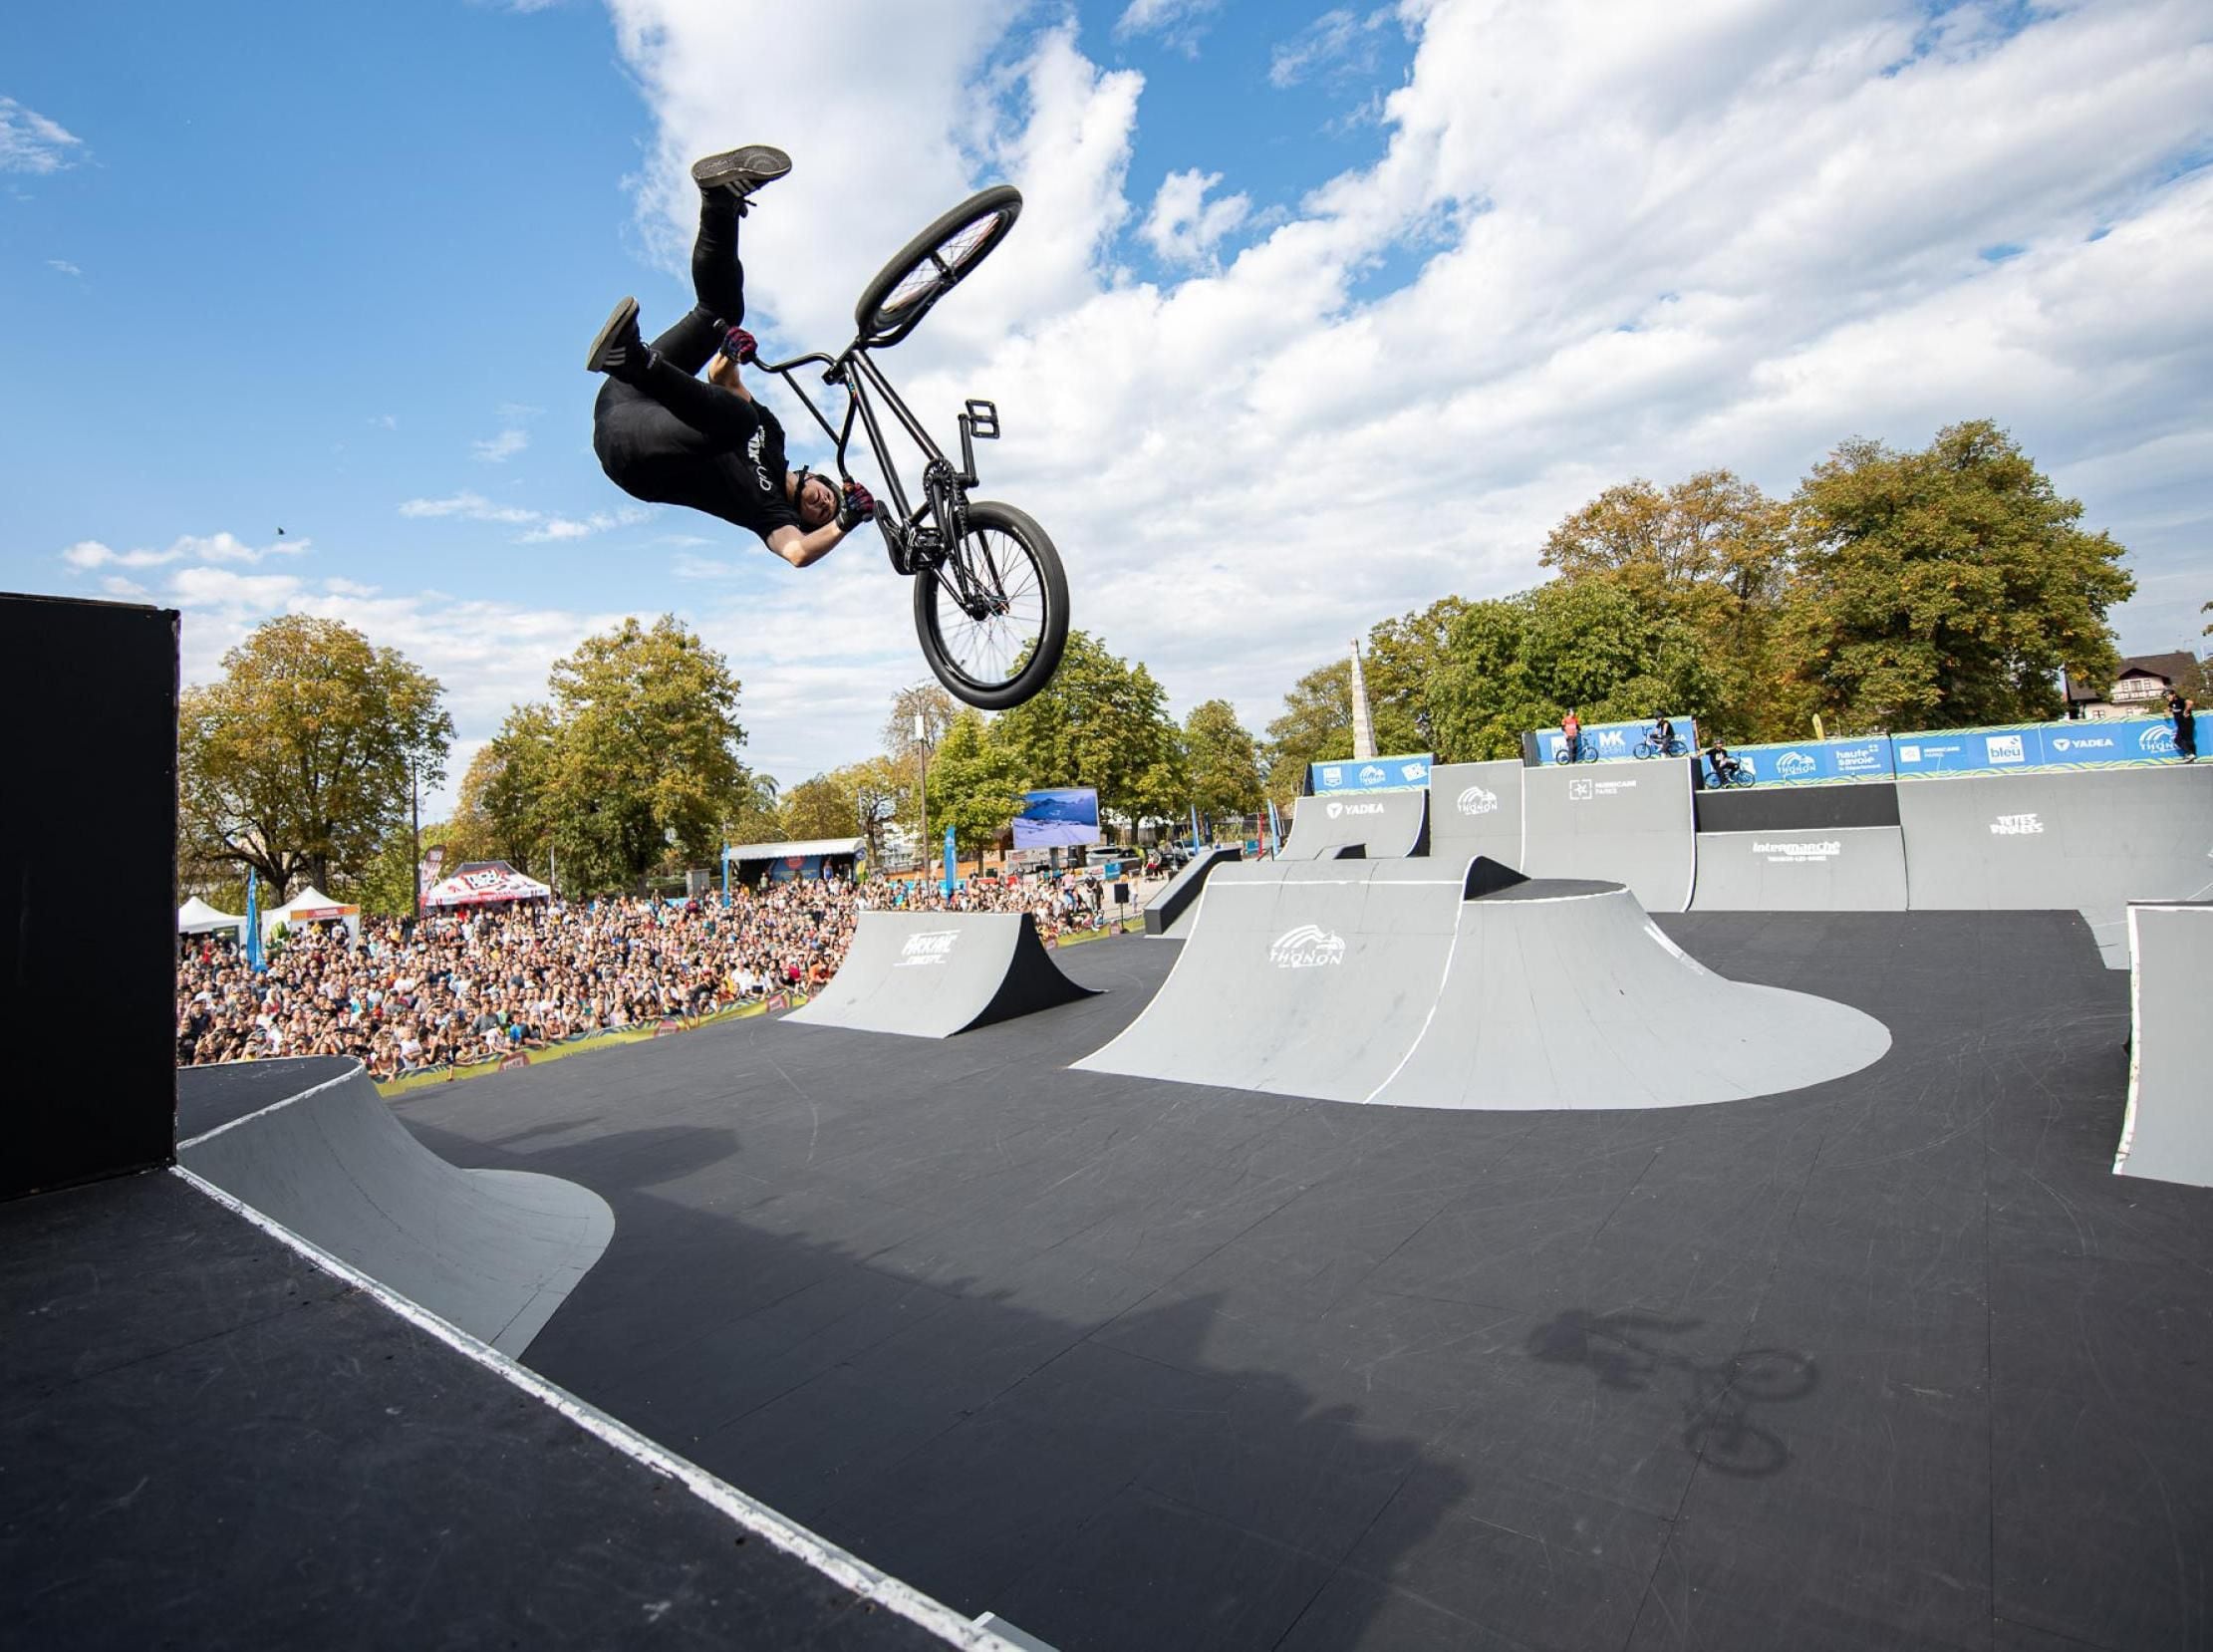 Major international BMX event coming to Wolverhampton offering chance to win huge cash prize